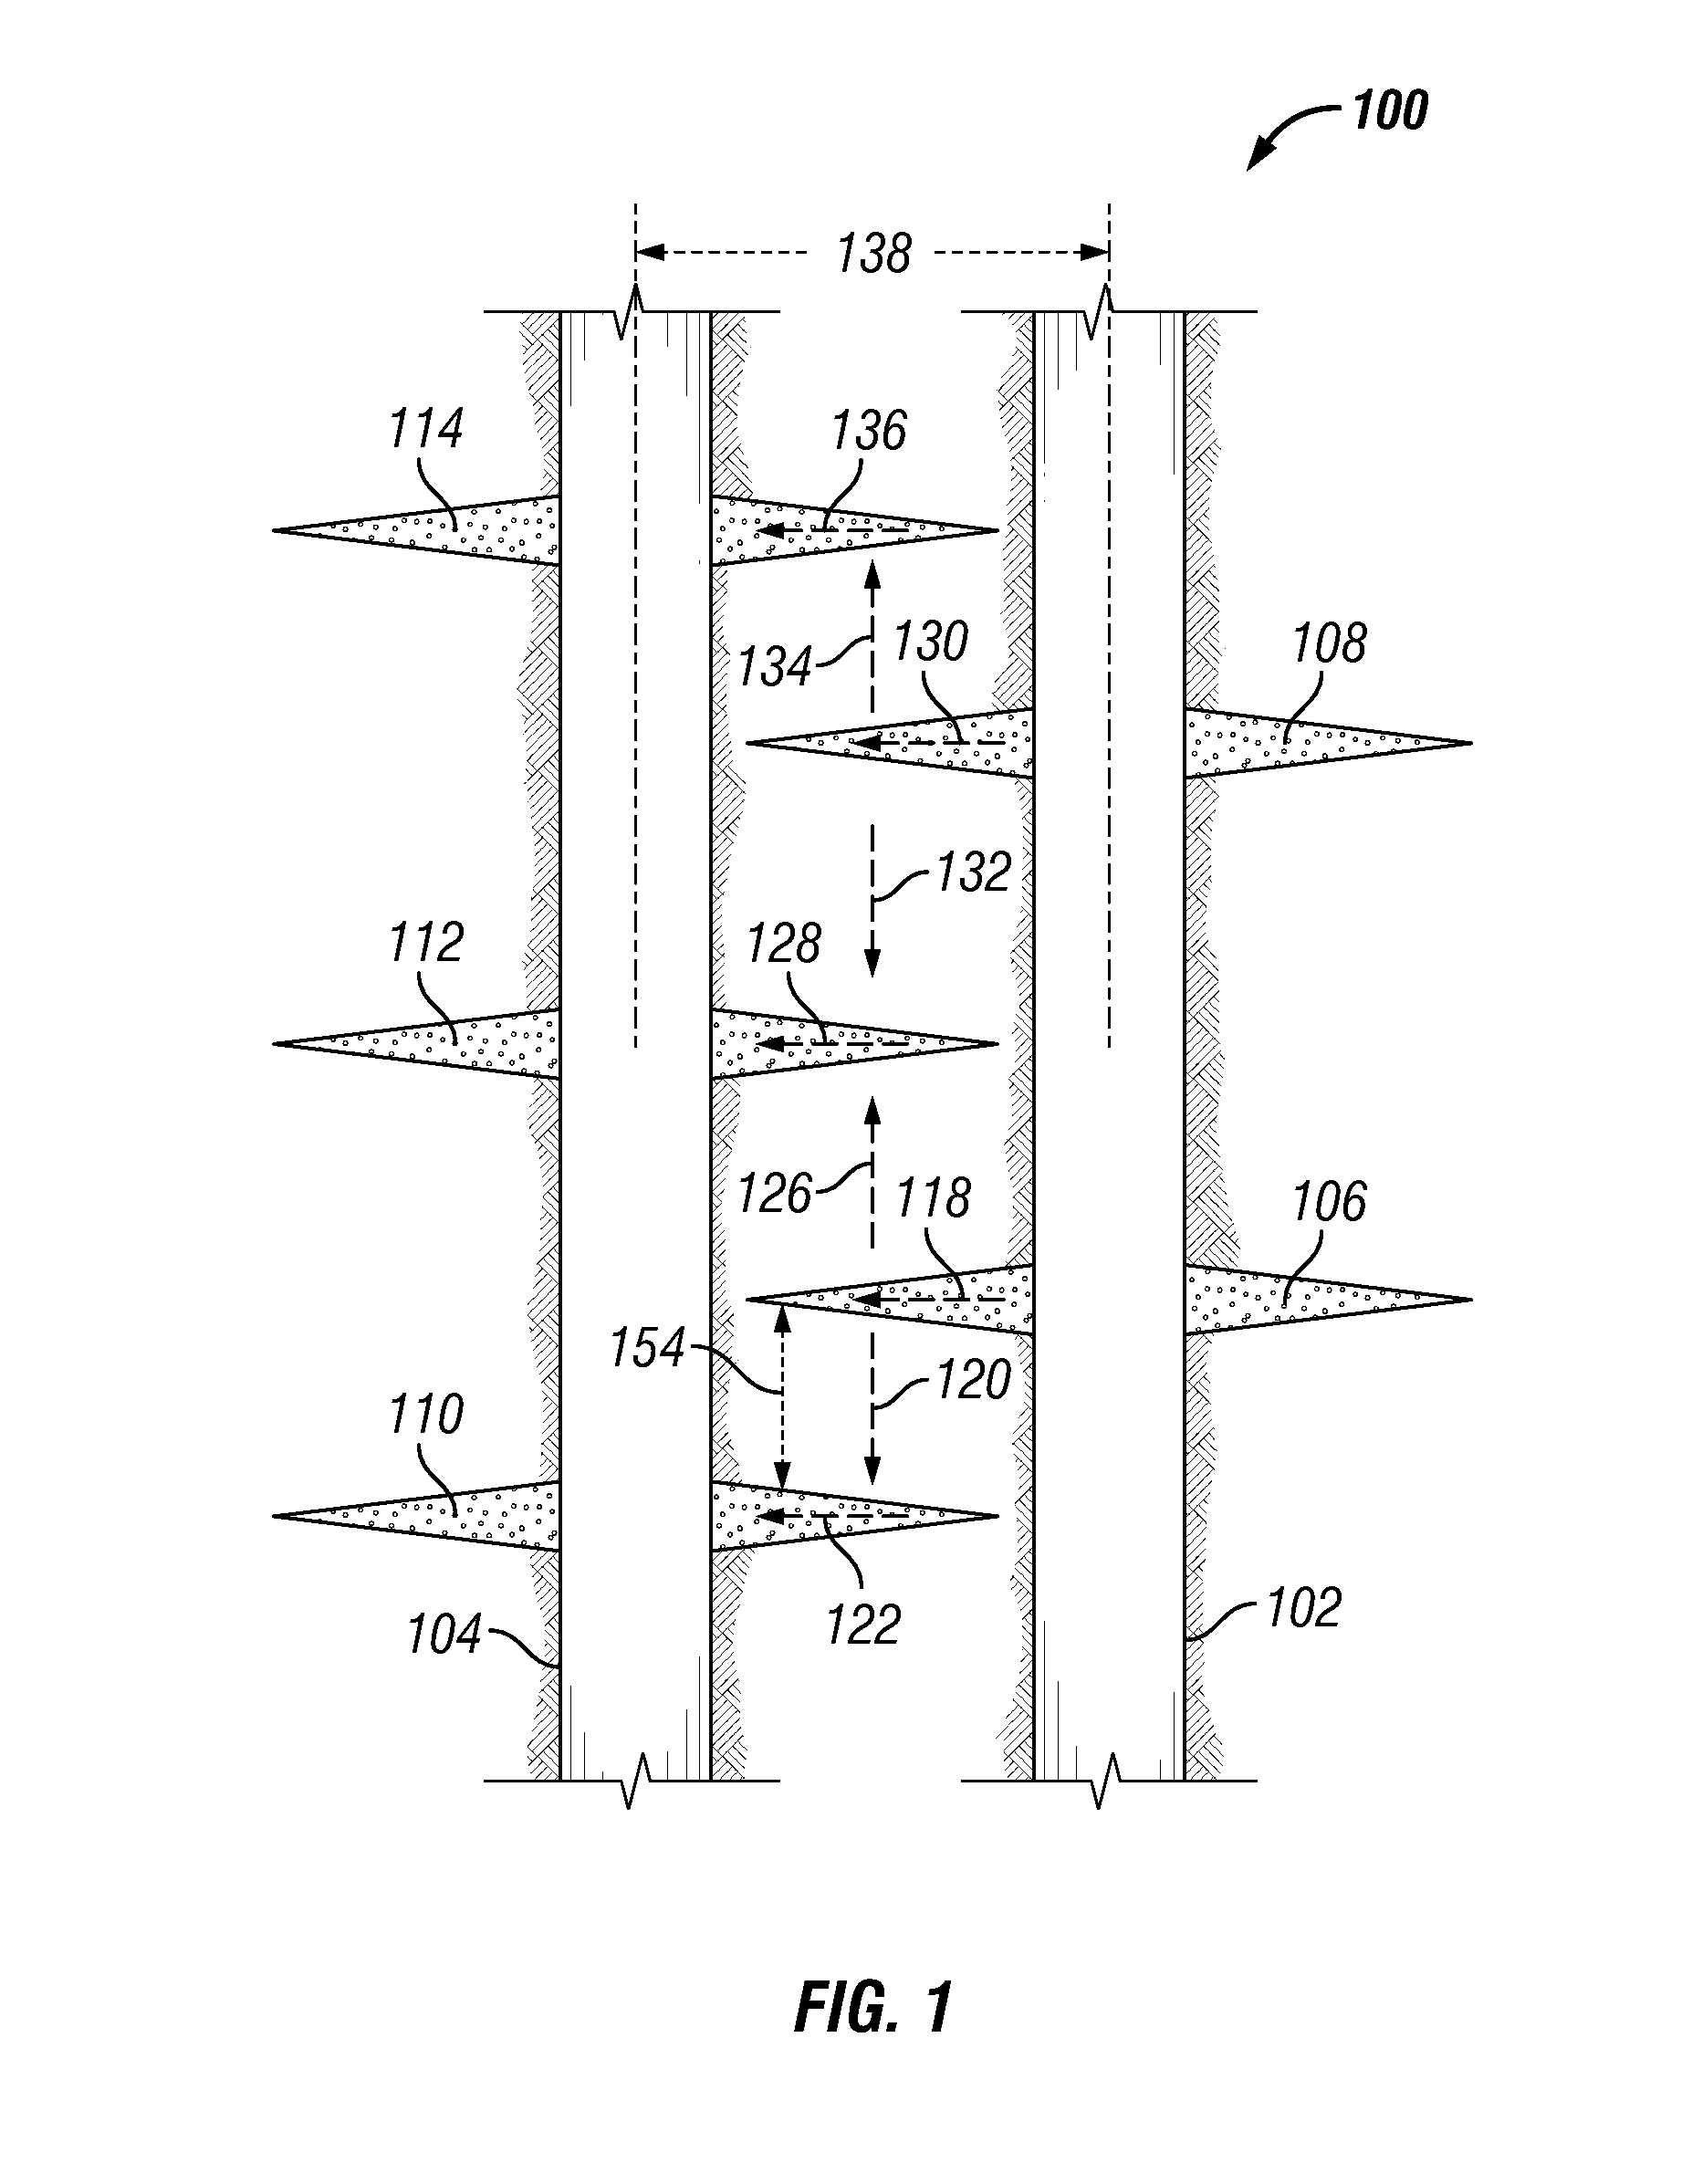 Fluid injection in light tight oil reservoirs